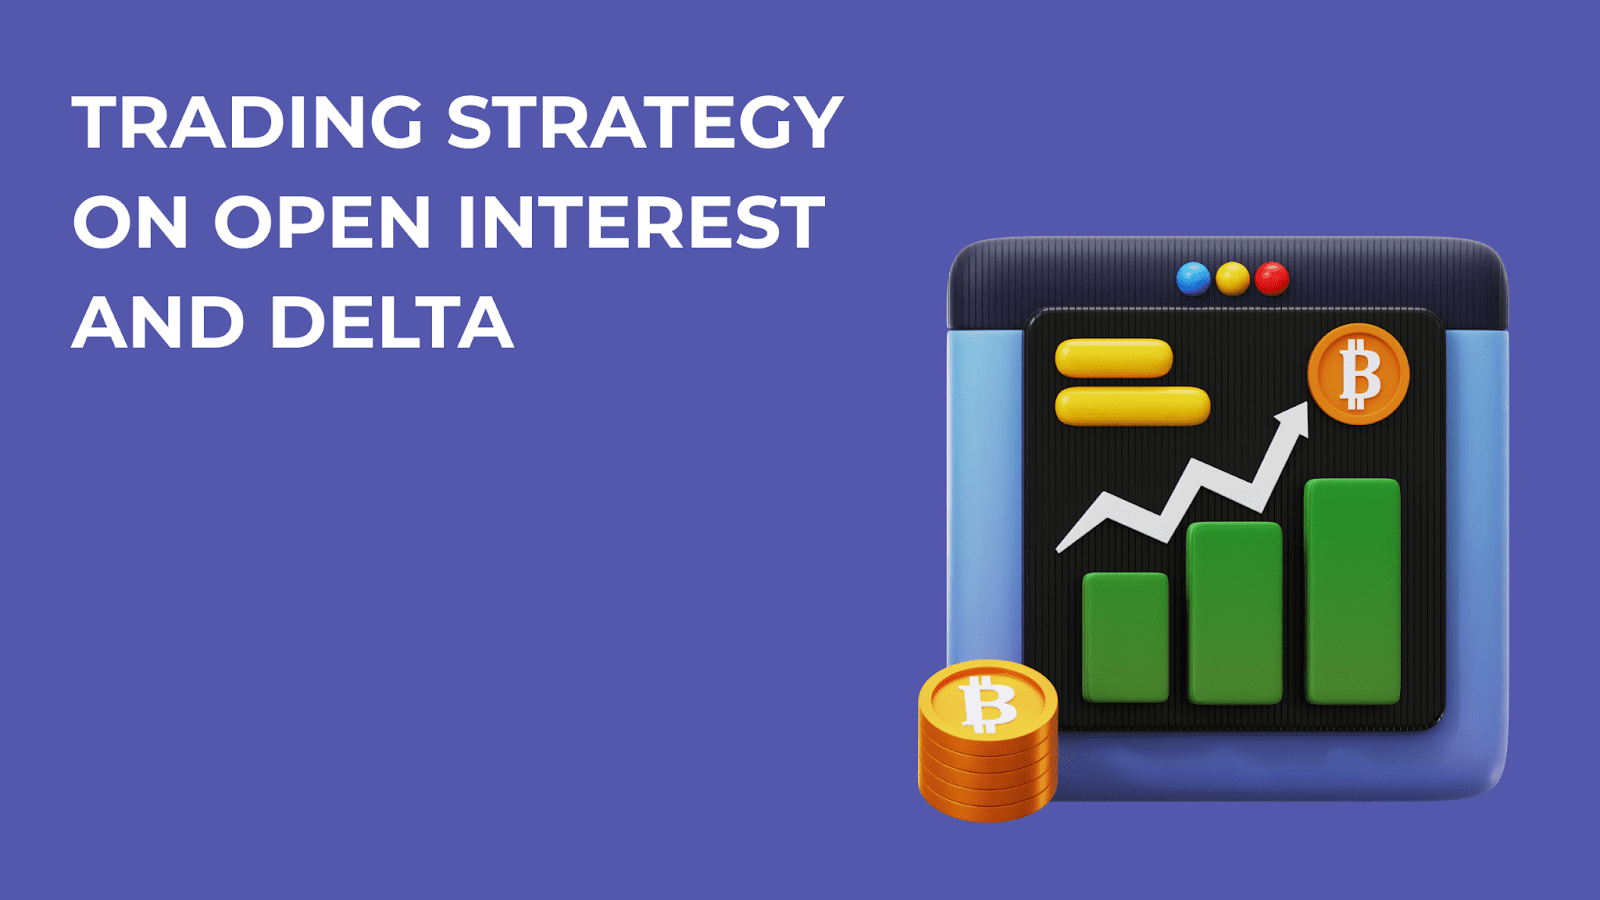 Trading strategy on Open Interest and Delta